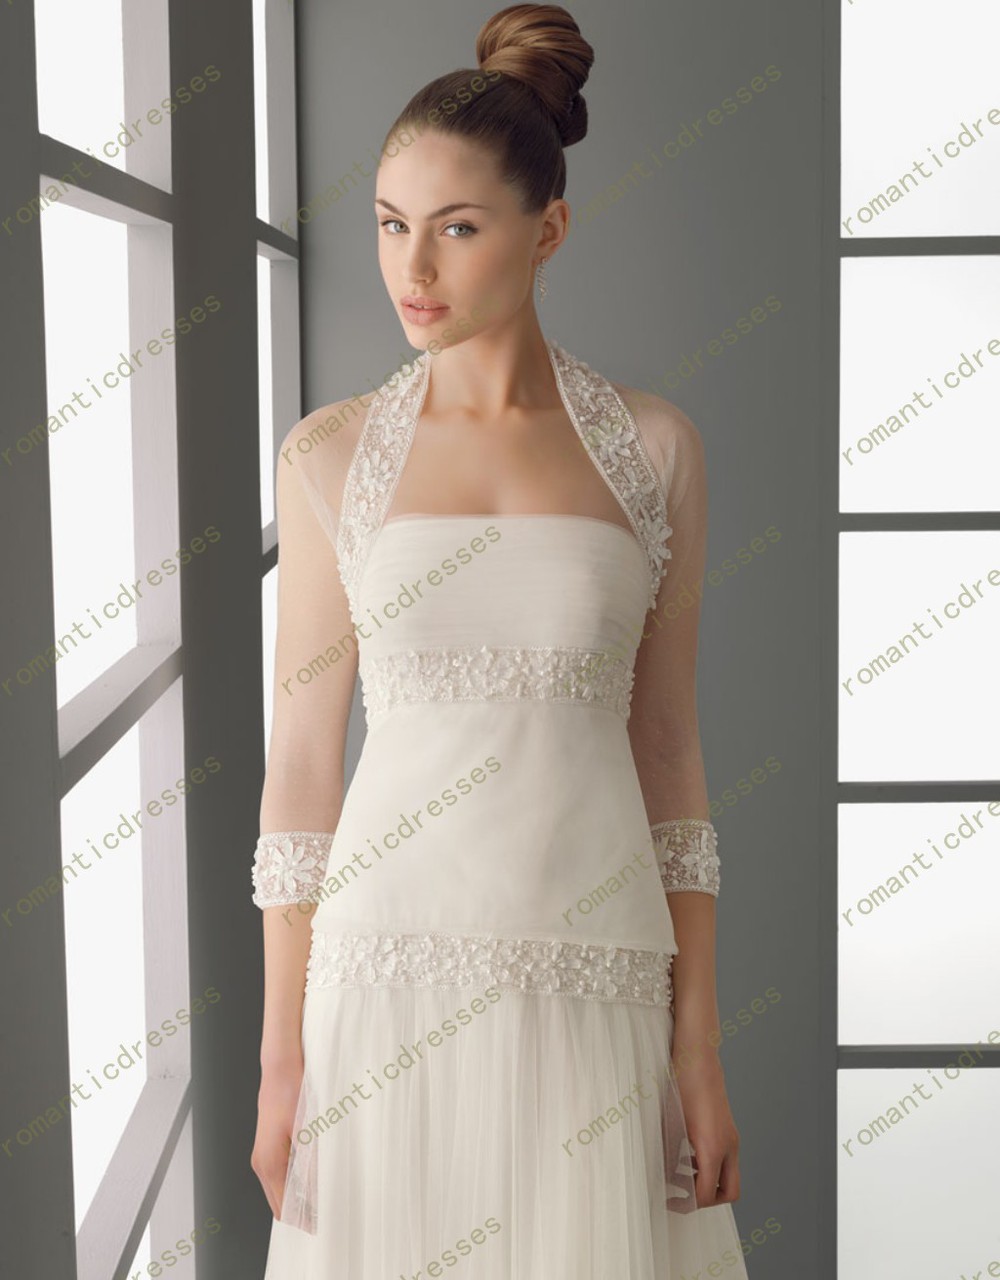 Custom made Lace See Through Appliques Half Sleeve Wedding Jackets 2013New Free Shipping wedding accessory